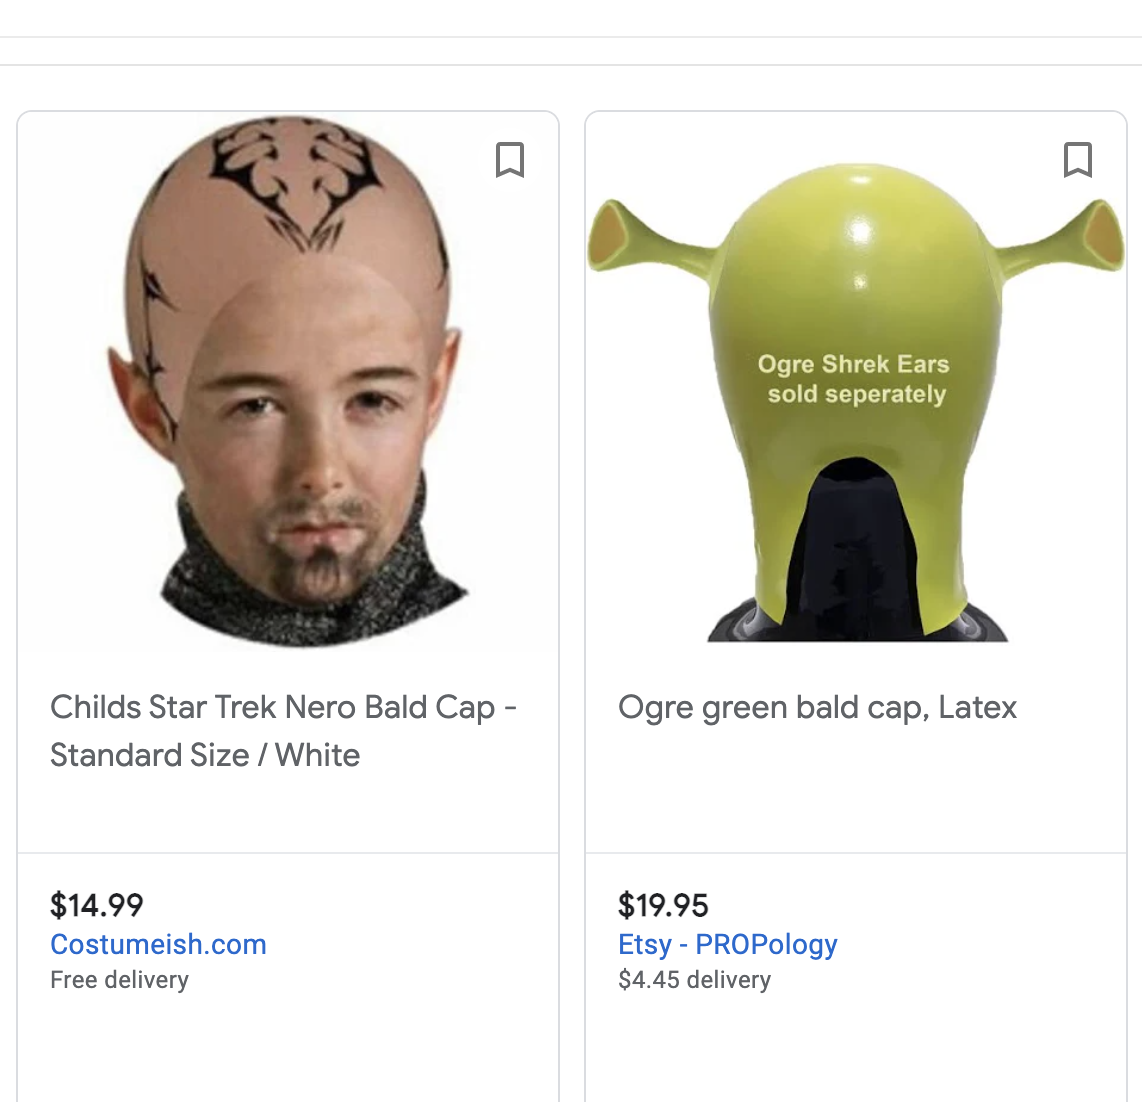 On the left, there&#x27;s a bald cap to look like Nero from Star Trek, and on the right is a Shrek ogre bald cap